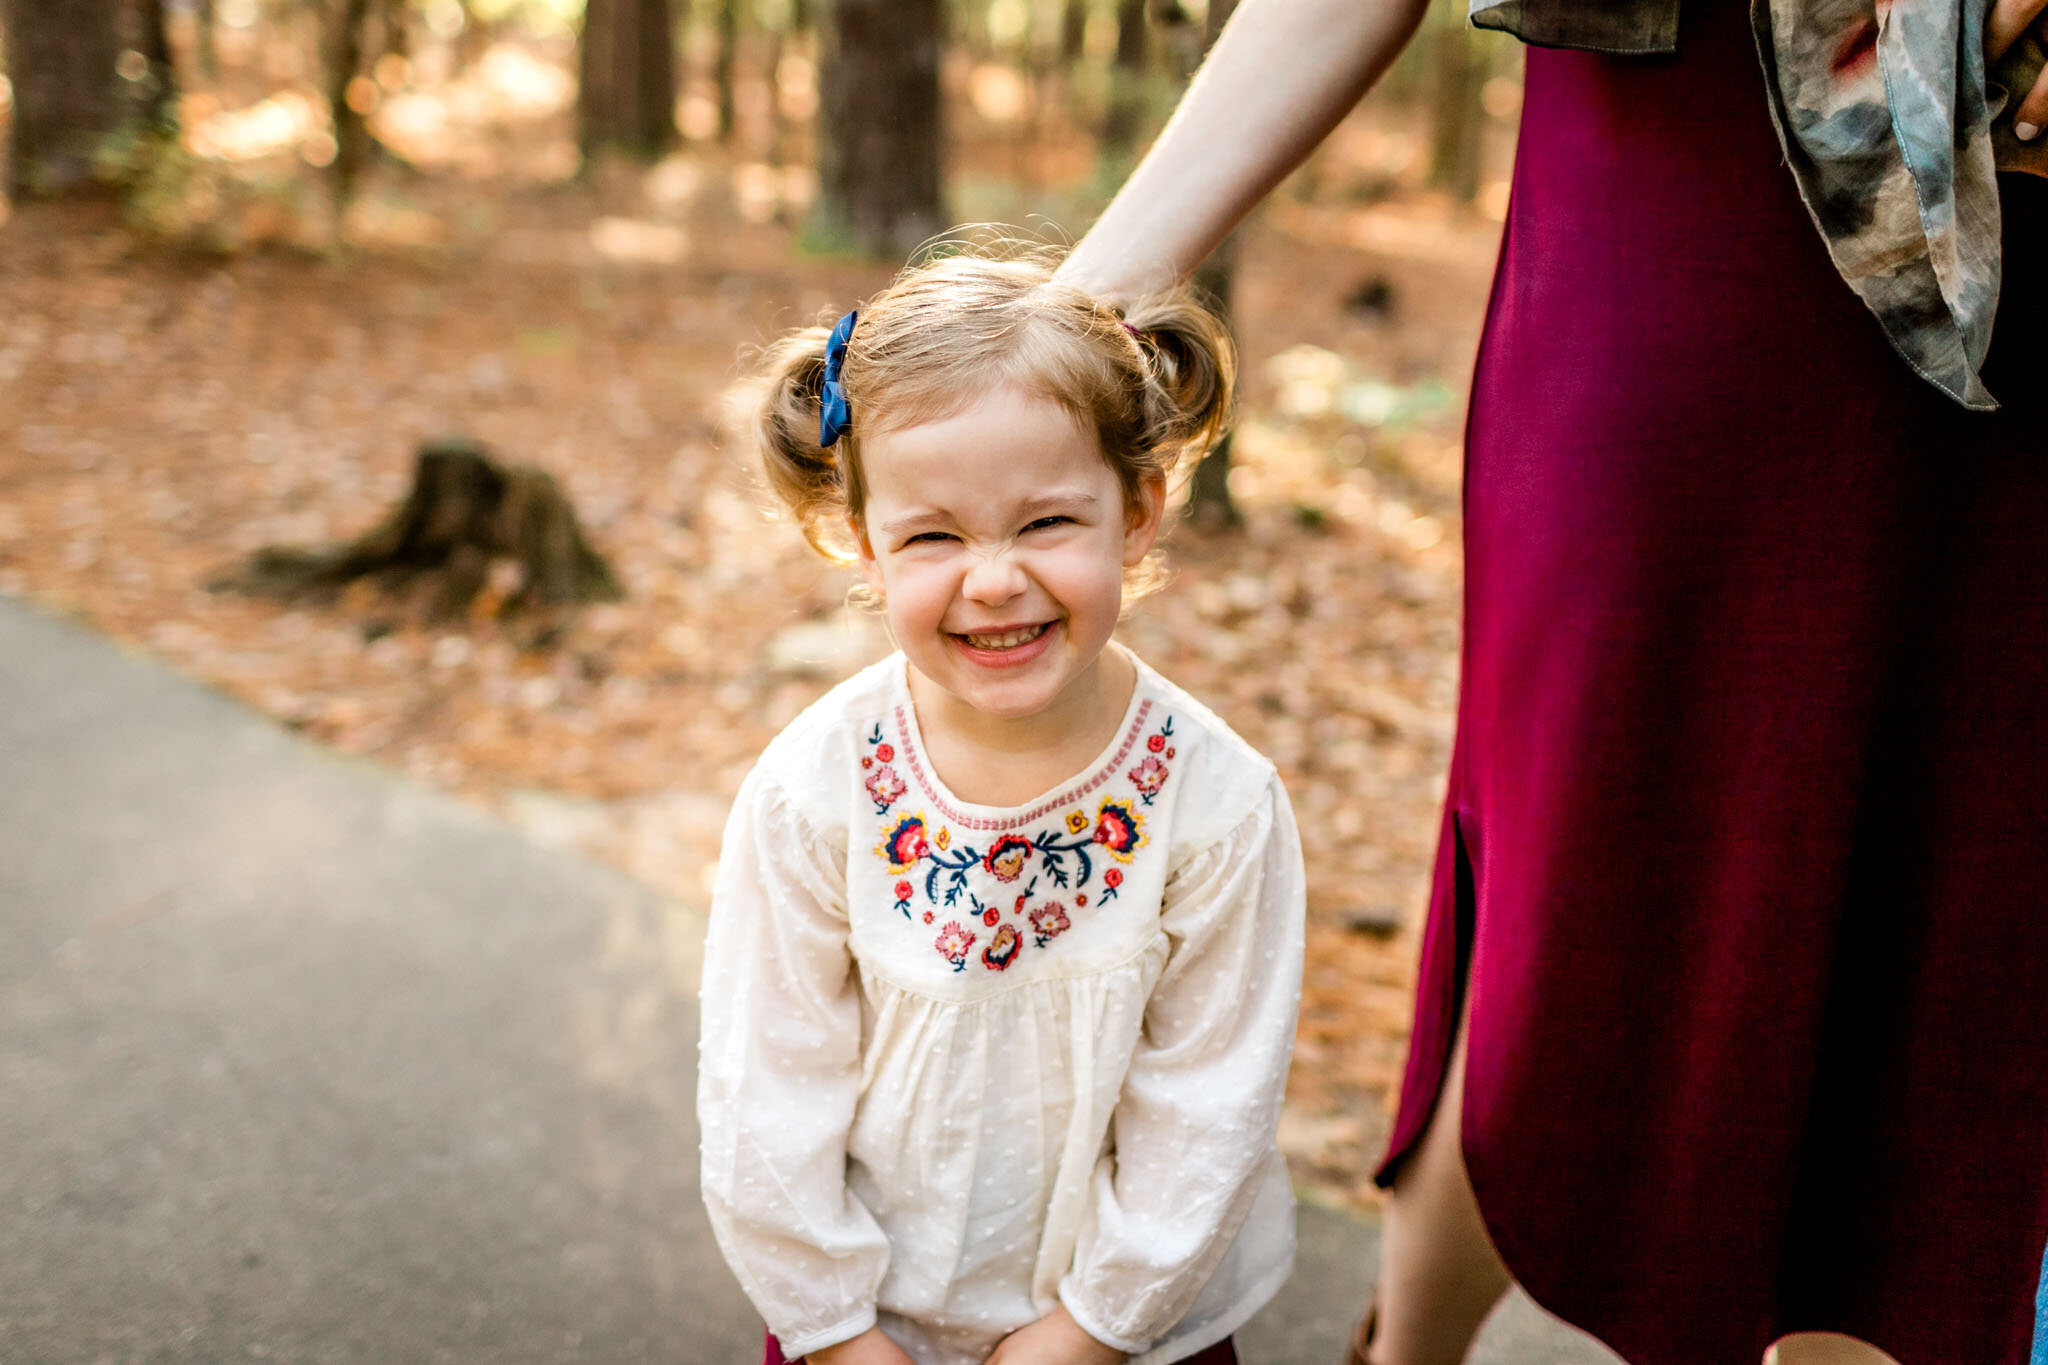 Raleigh Family Photographer | By G. Lin Photography | Umstead Park Fall Photos | Toddler girl smiling